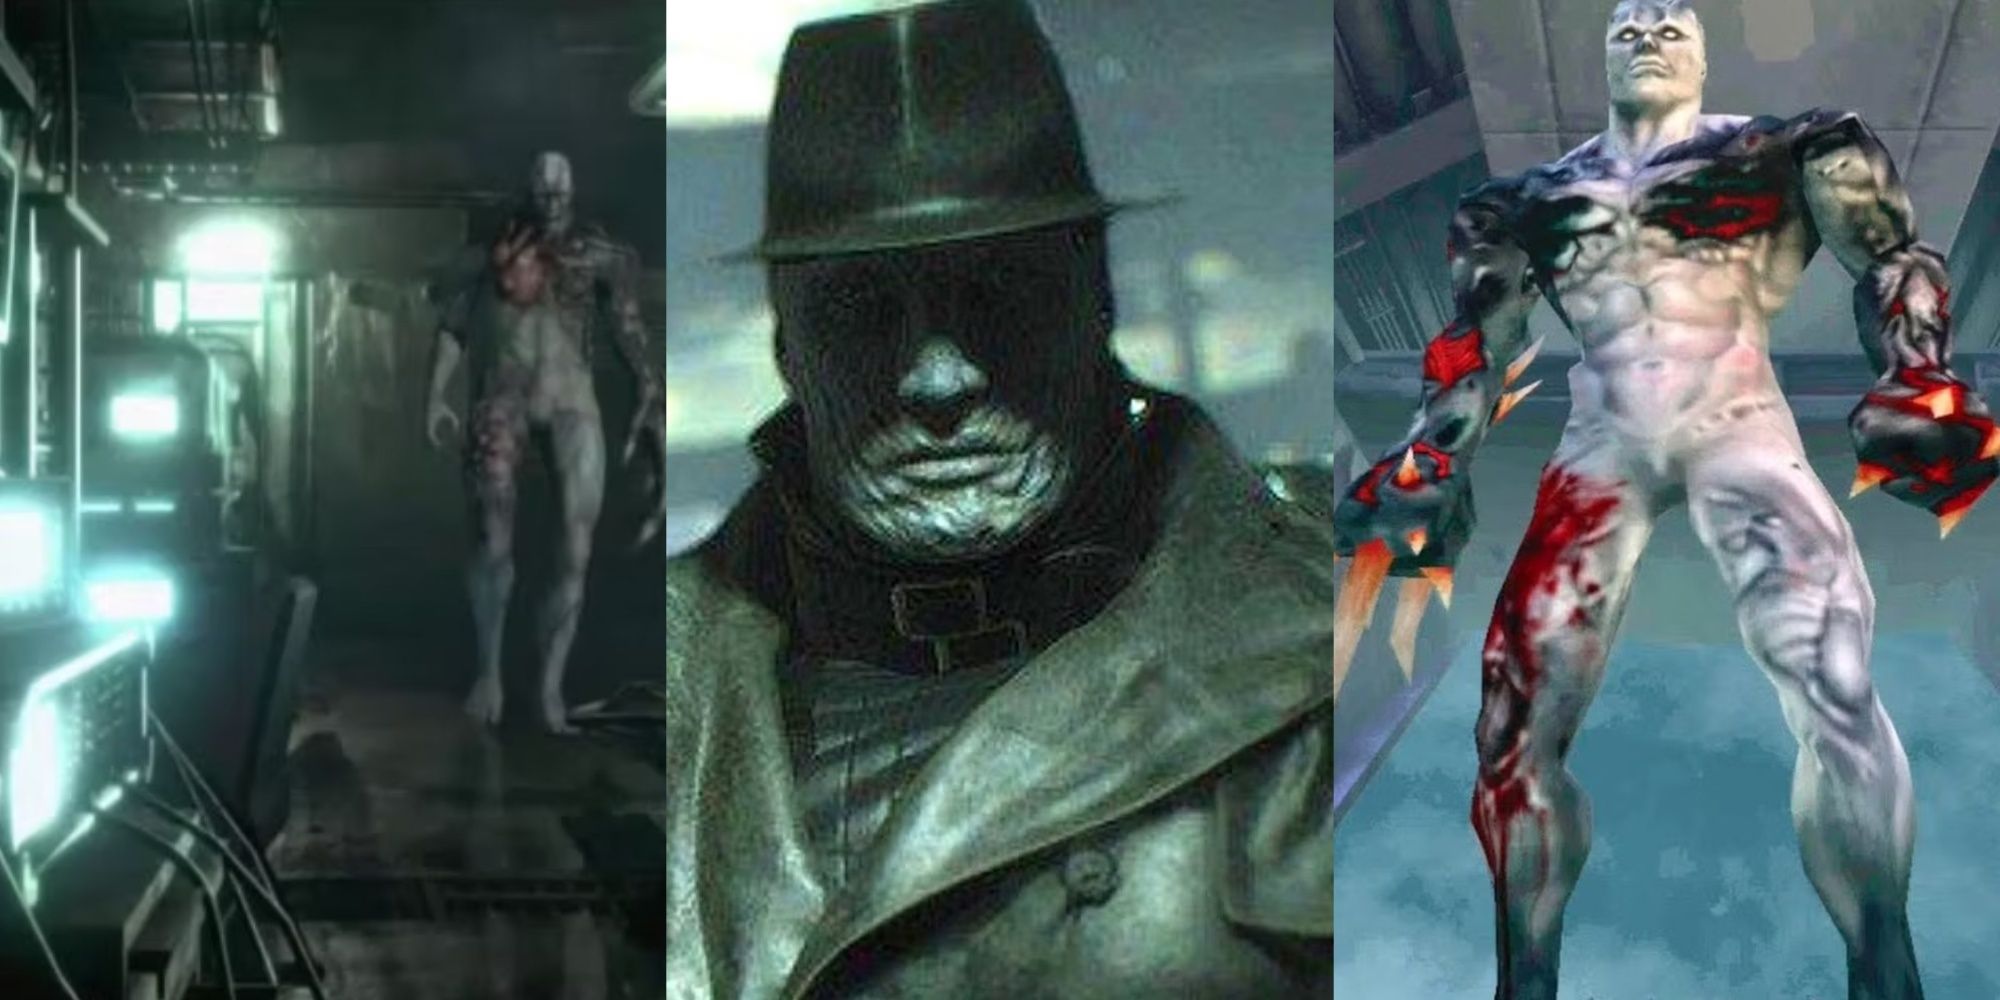 Resident Evil Tyrants the T-002 from the original Resident Evil, a close-up of Mr. X from Resident Evil 2 Remake, and the Tyrant from Code Veronica, left to right